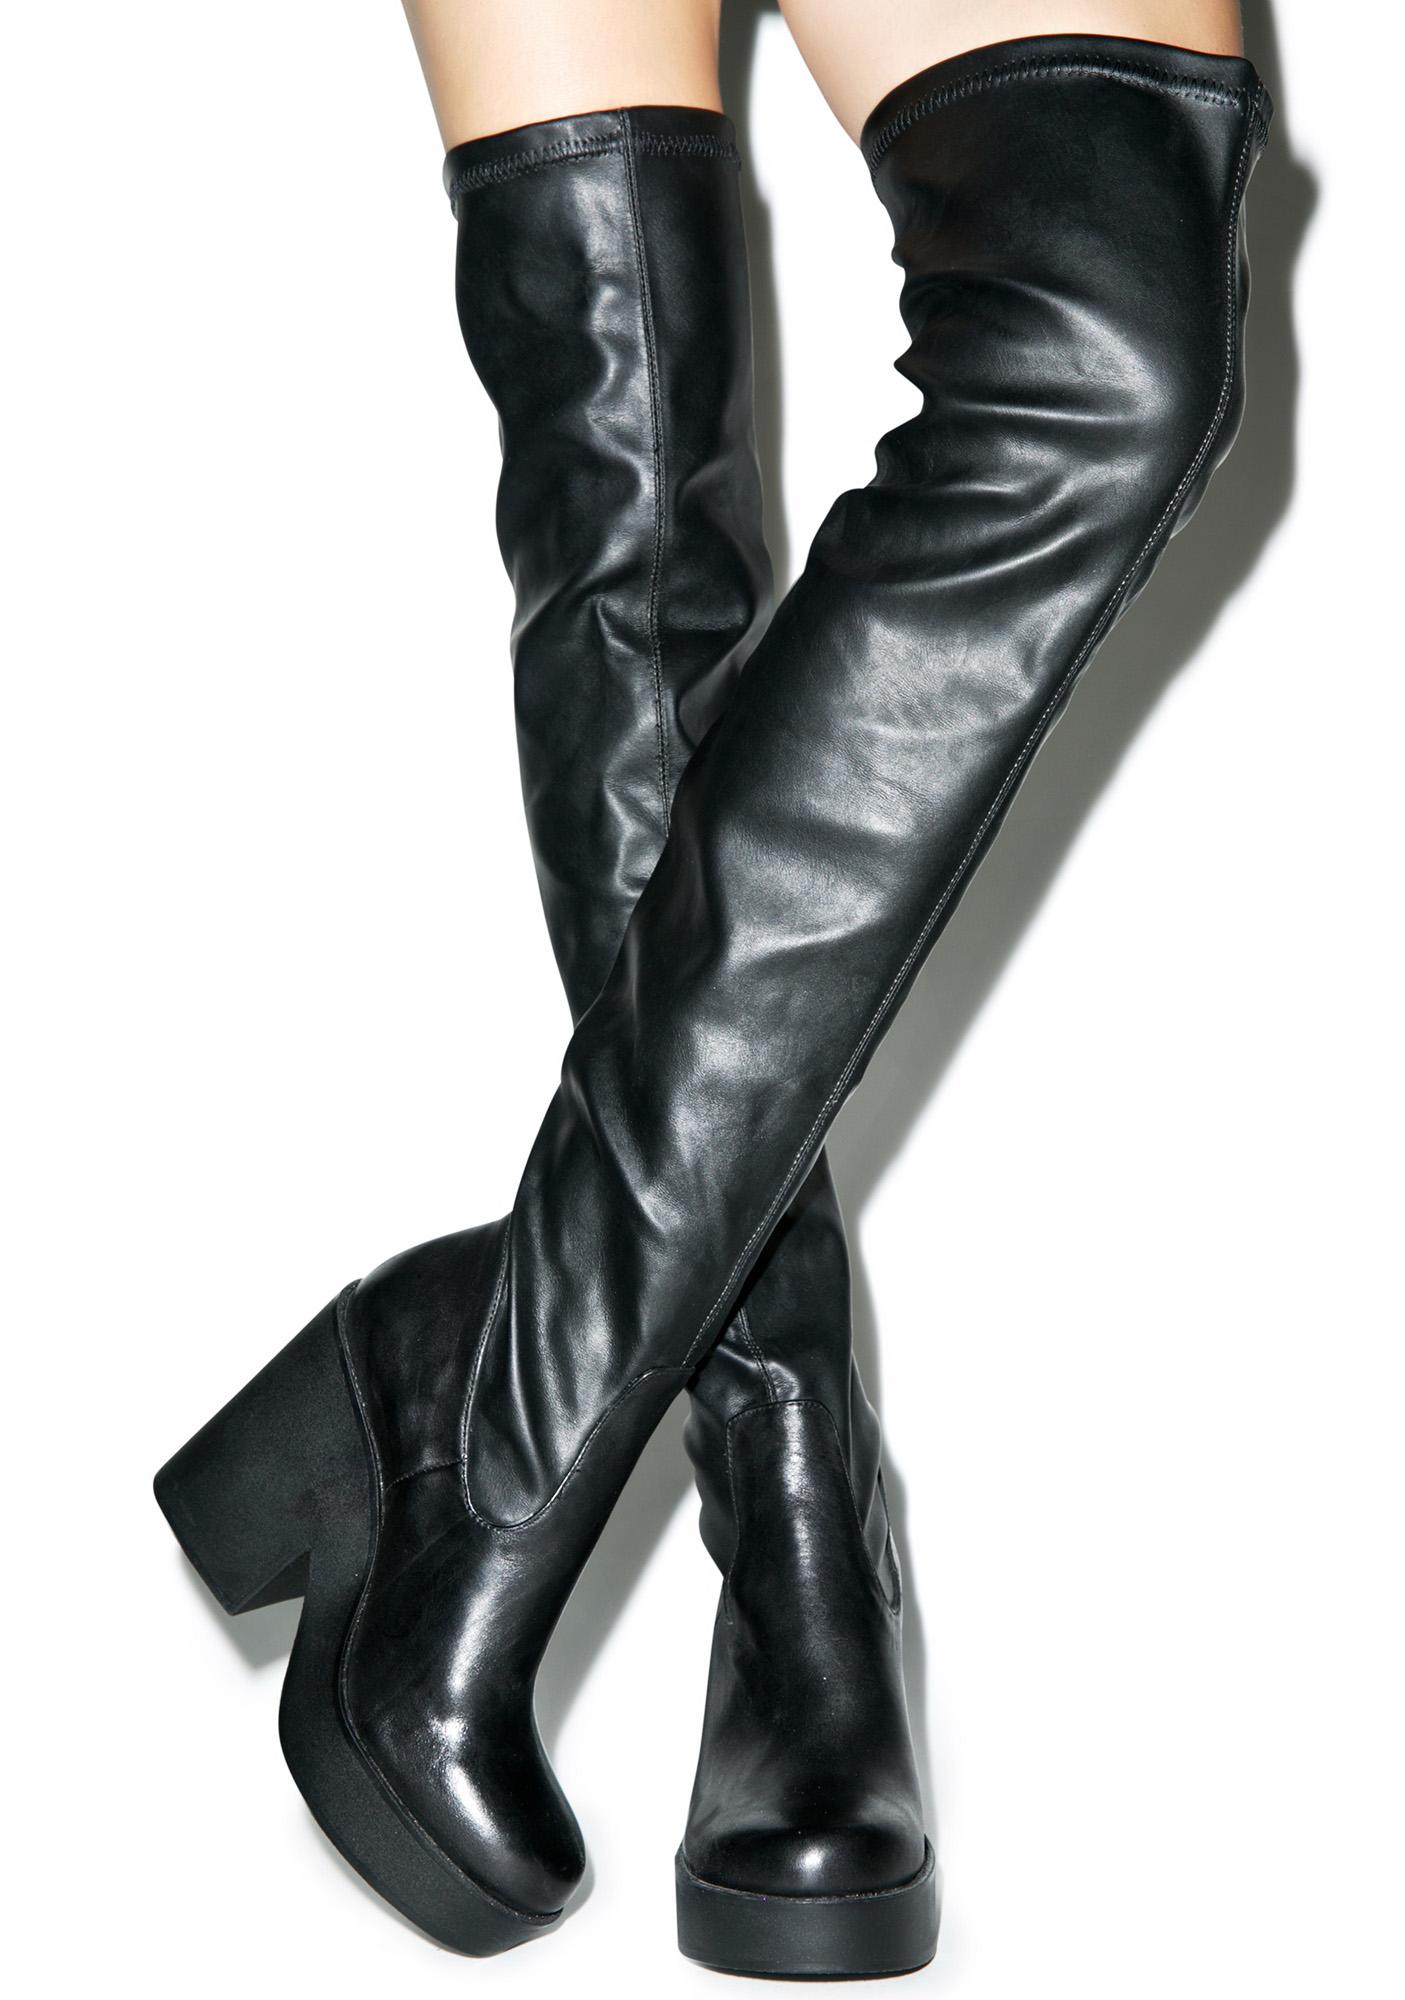 Windsor Smith Seb Thigh High Boots 